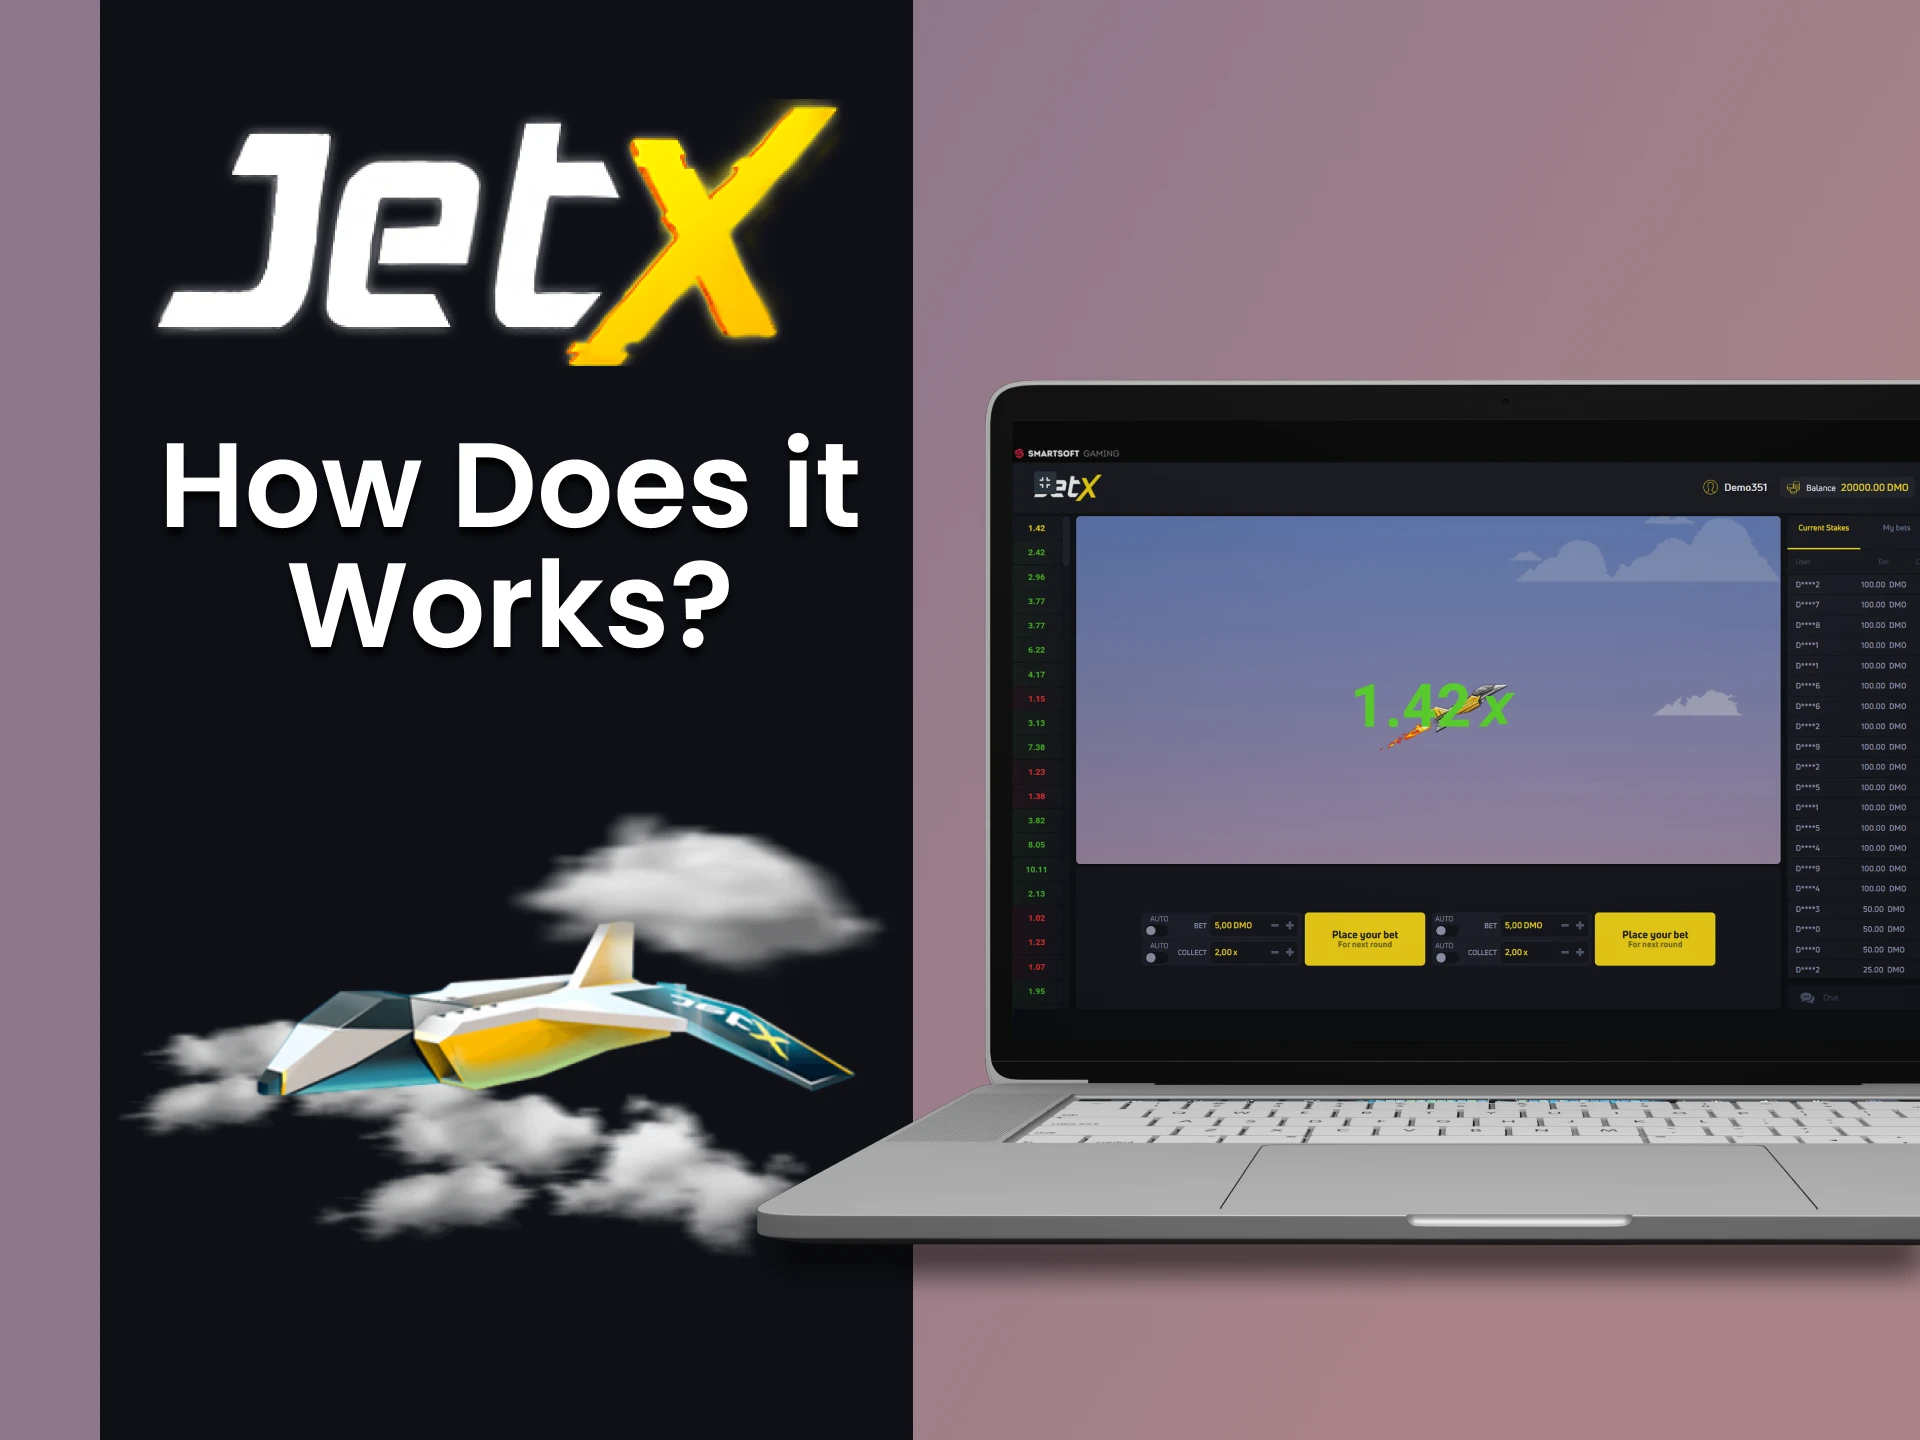 See how the JetX game is structured and works.